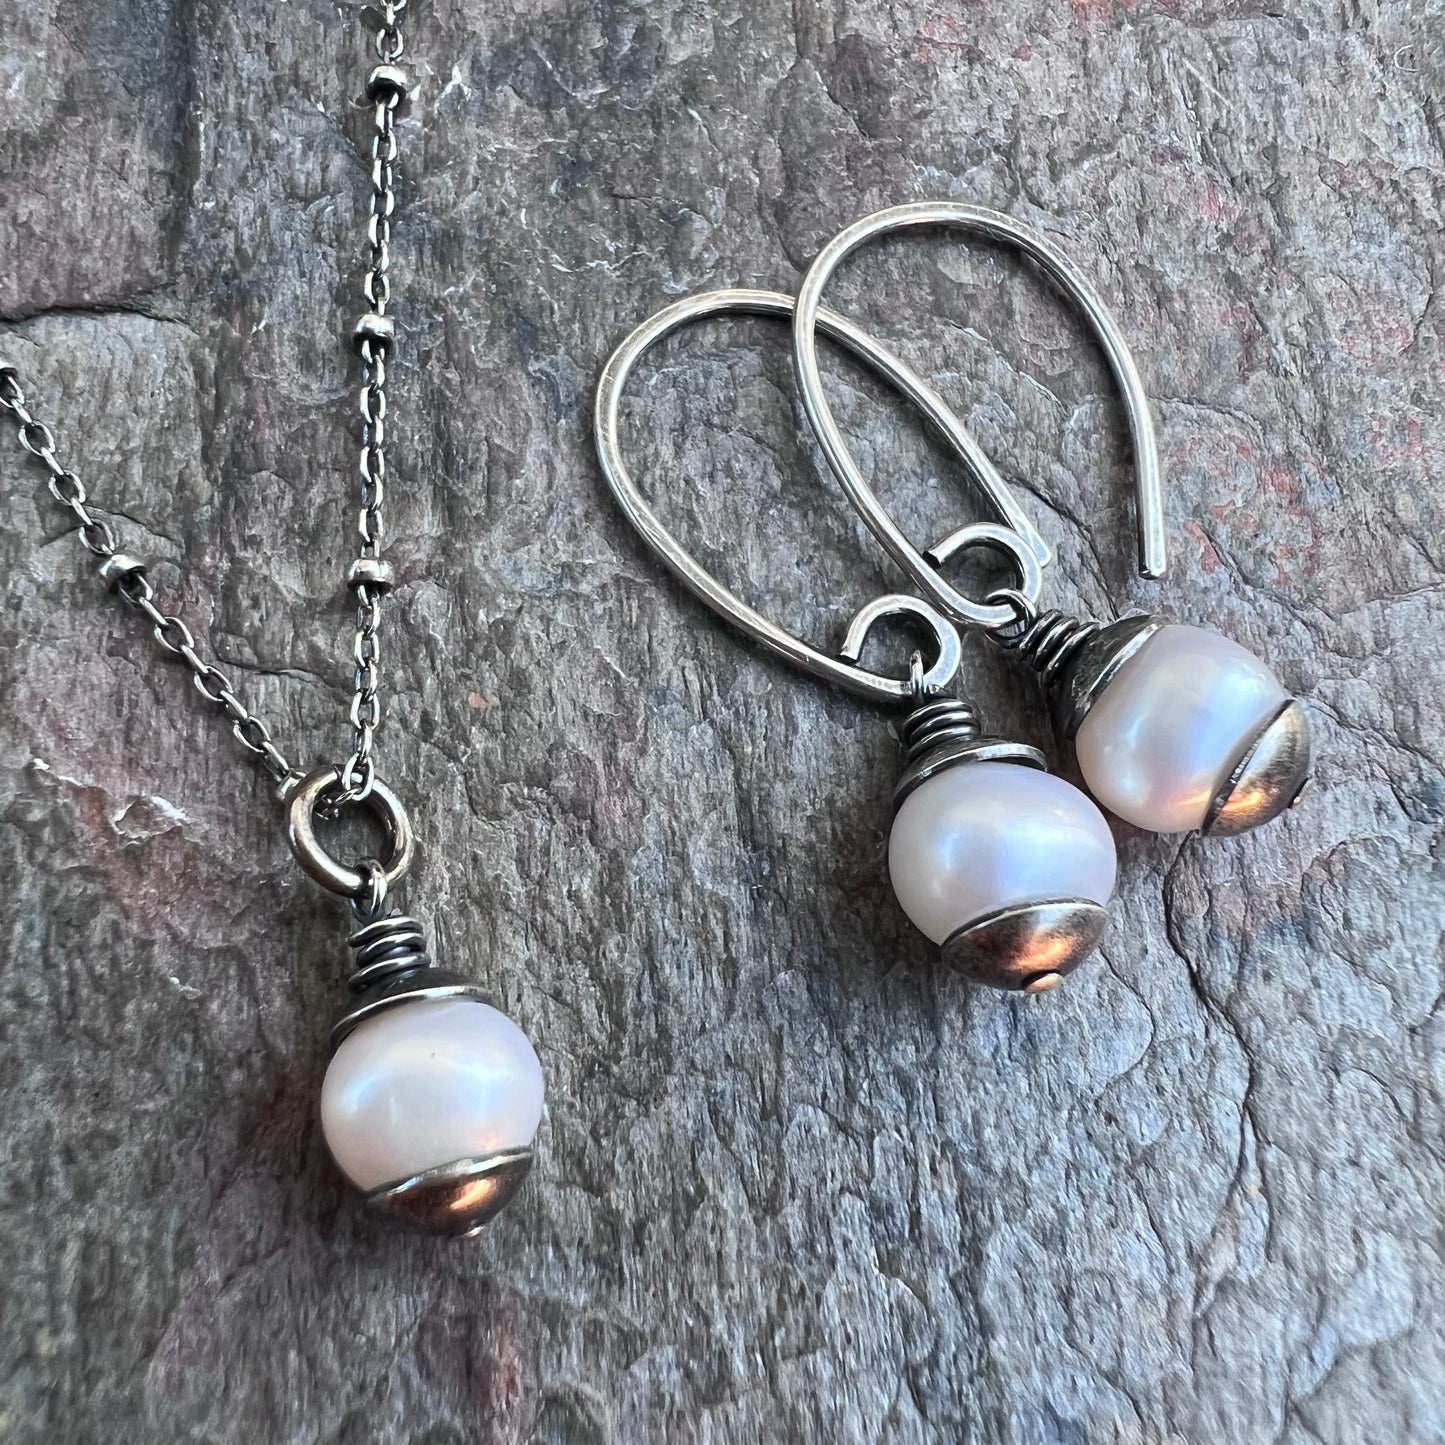 Sterling Silver Pearl Necklace - Small Genuine Freshwater Pearl Pendant on Sterling Silver Satellite Chain